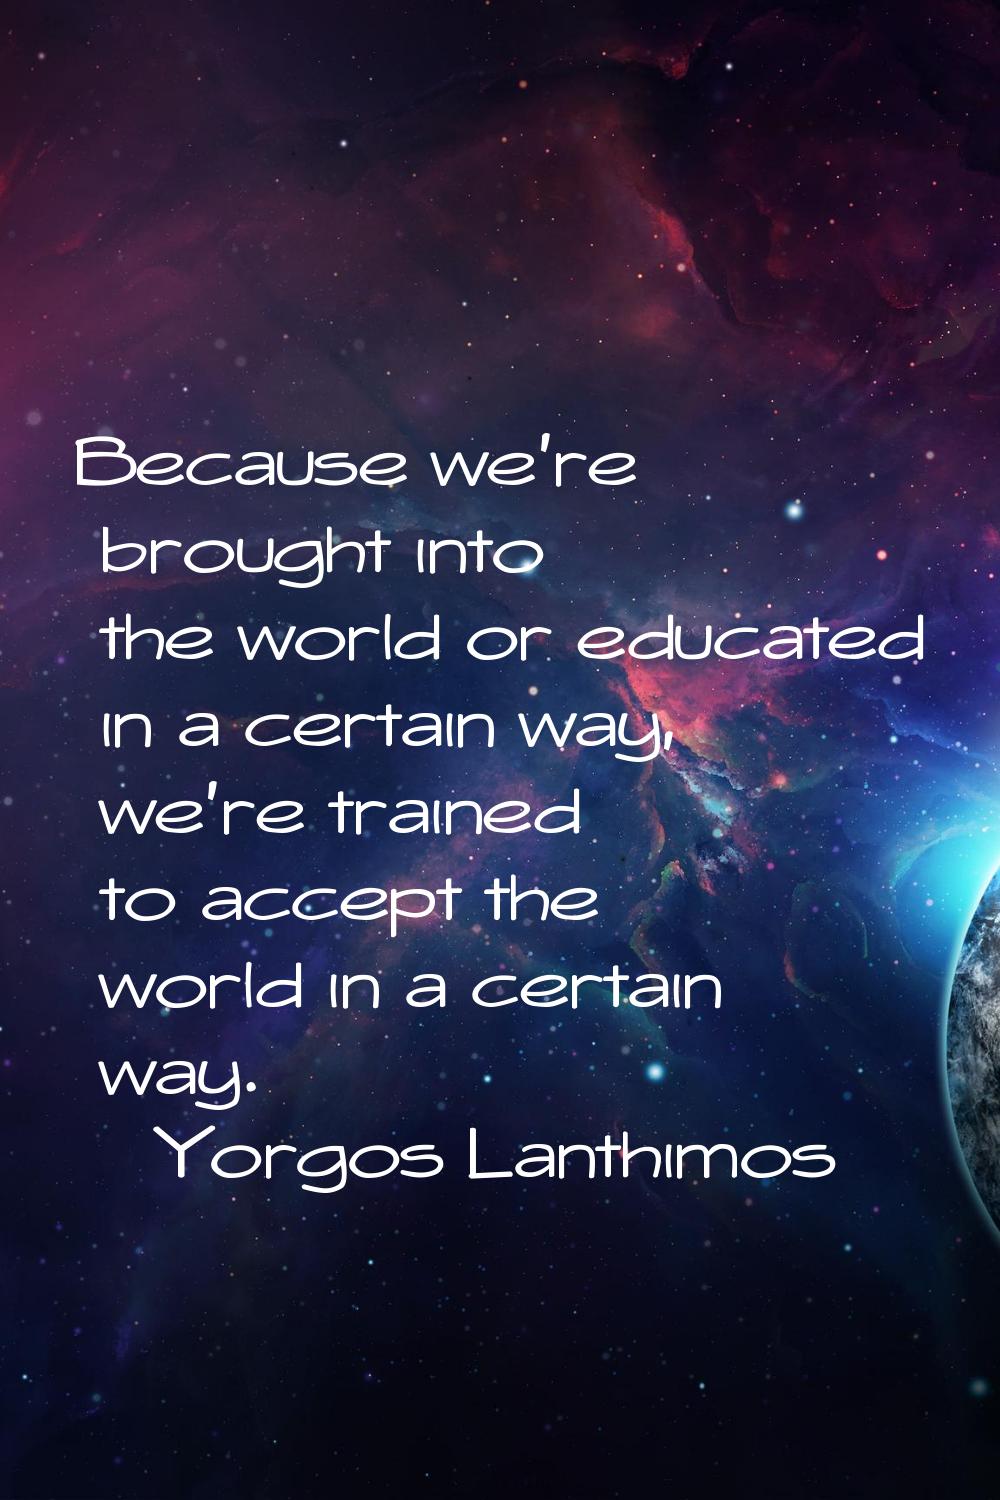 Because we're brought into the world or educated in a certain way, we're trained to accept the worl